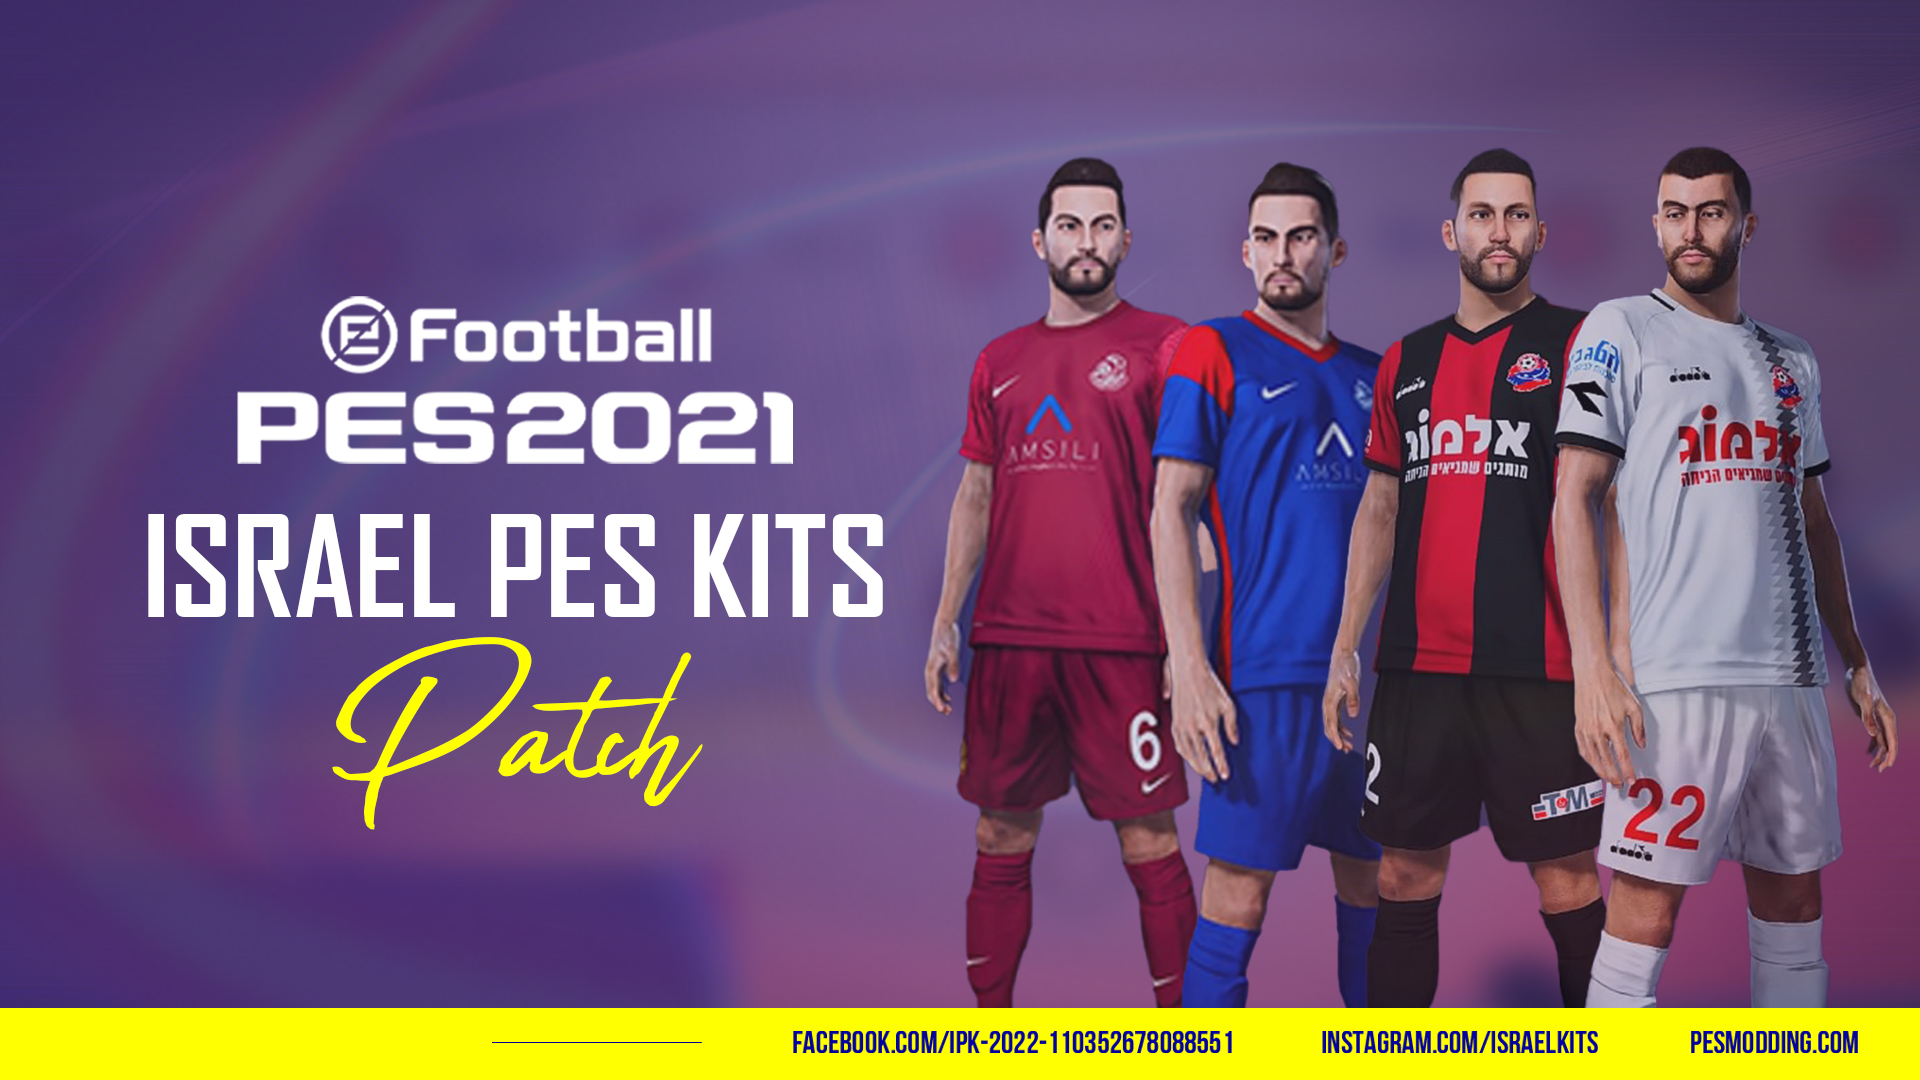 Pes Modding on Twitter: "#efootball #pes2021 Israel PES Kits Patch -  Israeli Premier League Option File for PS4/PS5 https://t.co/GhU0sOTPie  https://t.co/LVcIaFd3bH" / Twitter